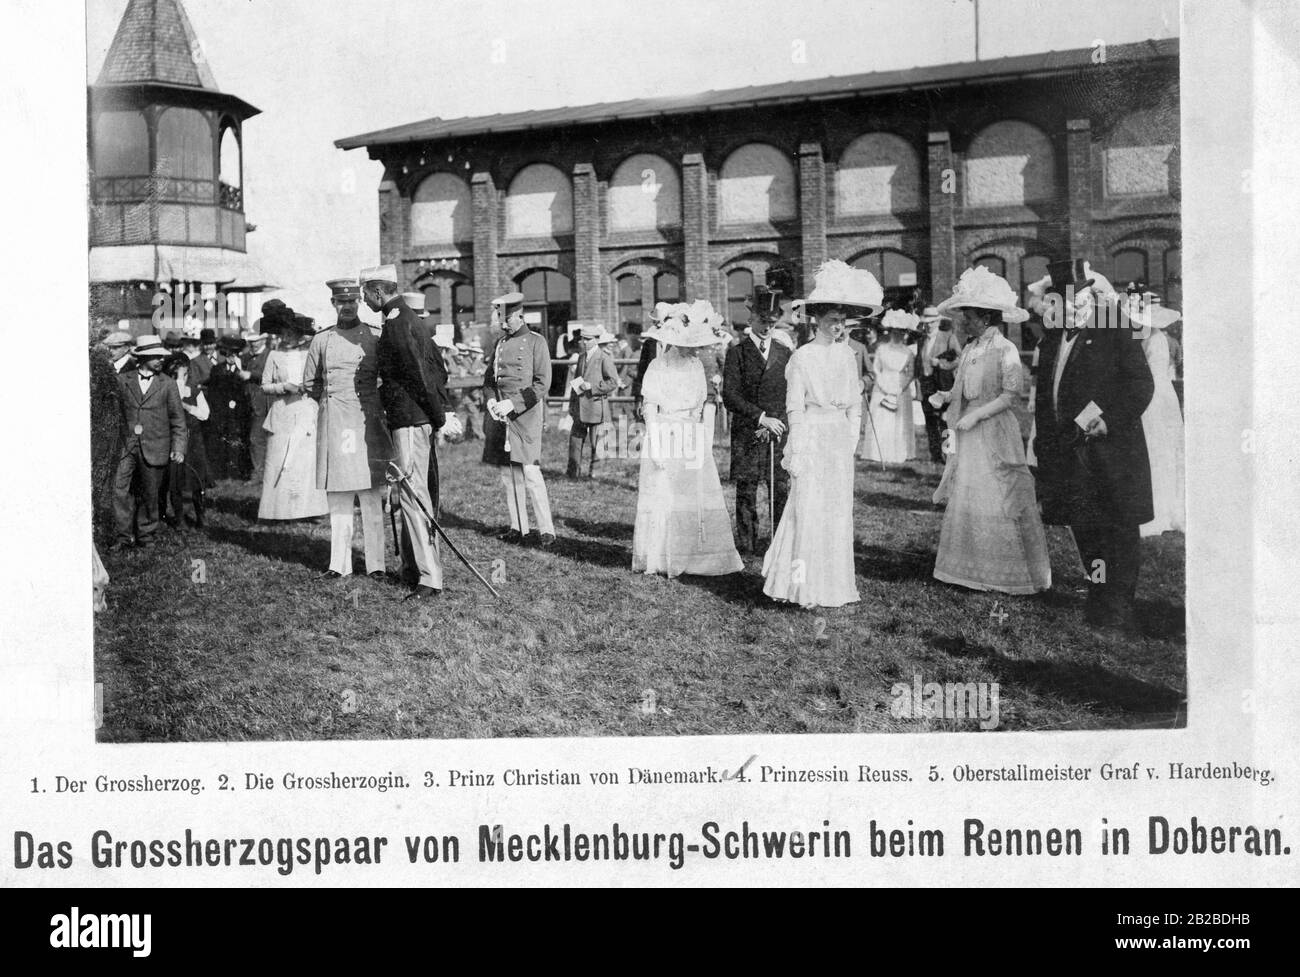 Friedrich Franz IV, Grand Duke of Mecklenburg Schwerin, (1st from left) in conversation with Prince Christian, later King of Denmark (2nd from left), visiting the horse race in Doberan (since 1921 Bad Doberan). Also recognizable on the picture: his wife Alexandra of Hanover and Cumberland, Grand Duchess of Mecklenburg-Schwerin (3rd from the right), Princess Reuss (2nd from the right) and the Crown Equerry Count von Hardenberg (1st from right)). Stock Photo